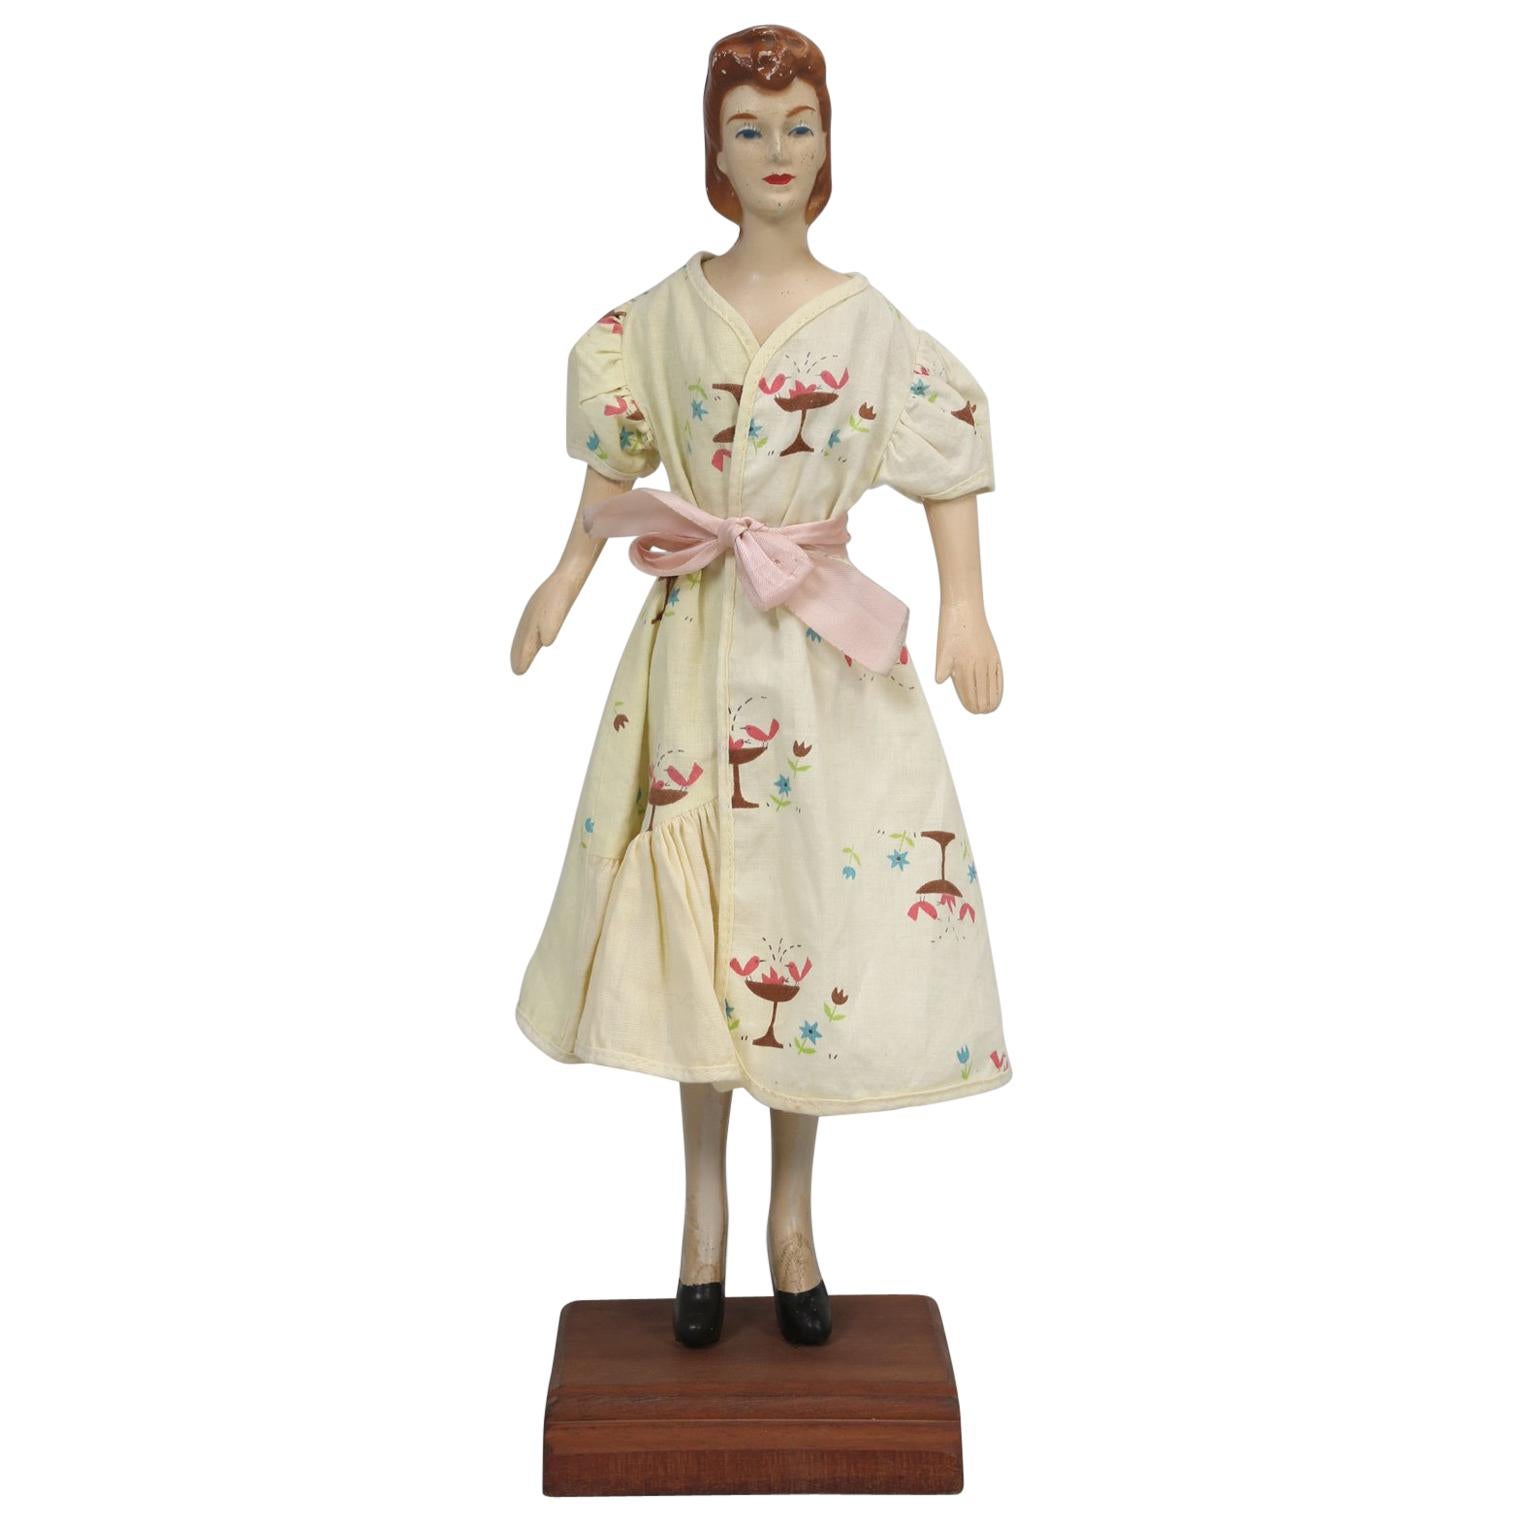 Miniature Department Store Mannequin, Used on a Display Counter